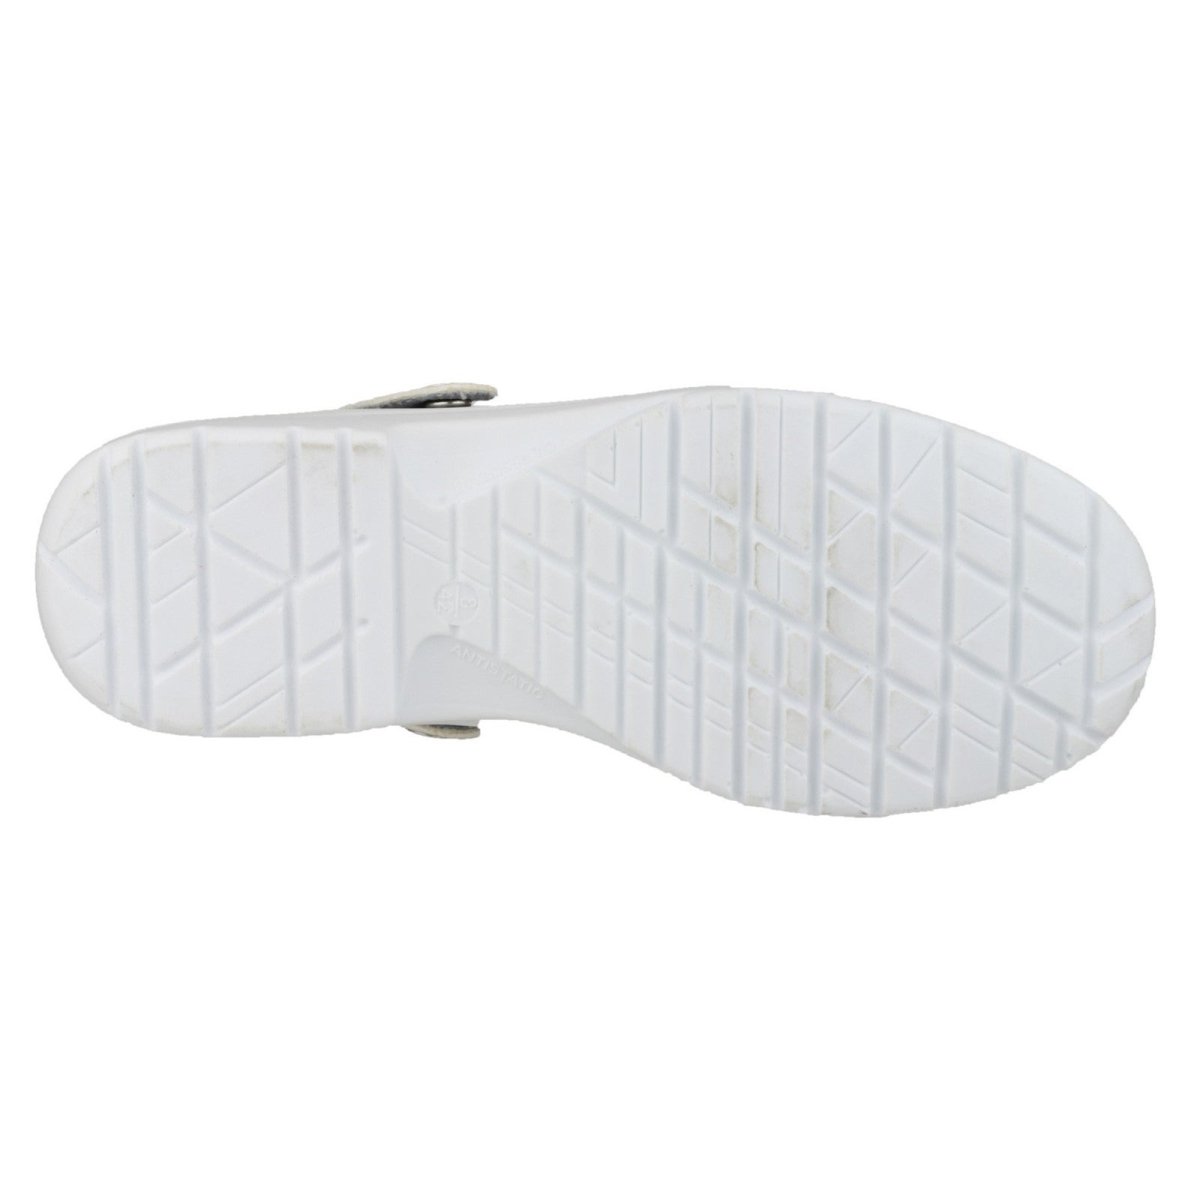 Amblers FS512 White Lightweight SRC Antistatic Safety Clogs - Shoe Store Direct